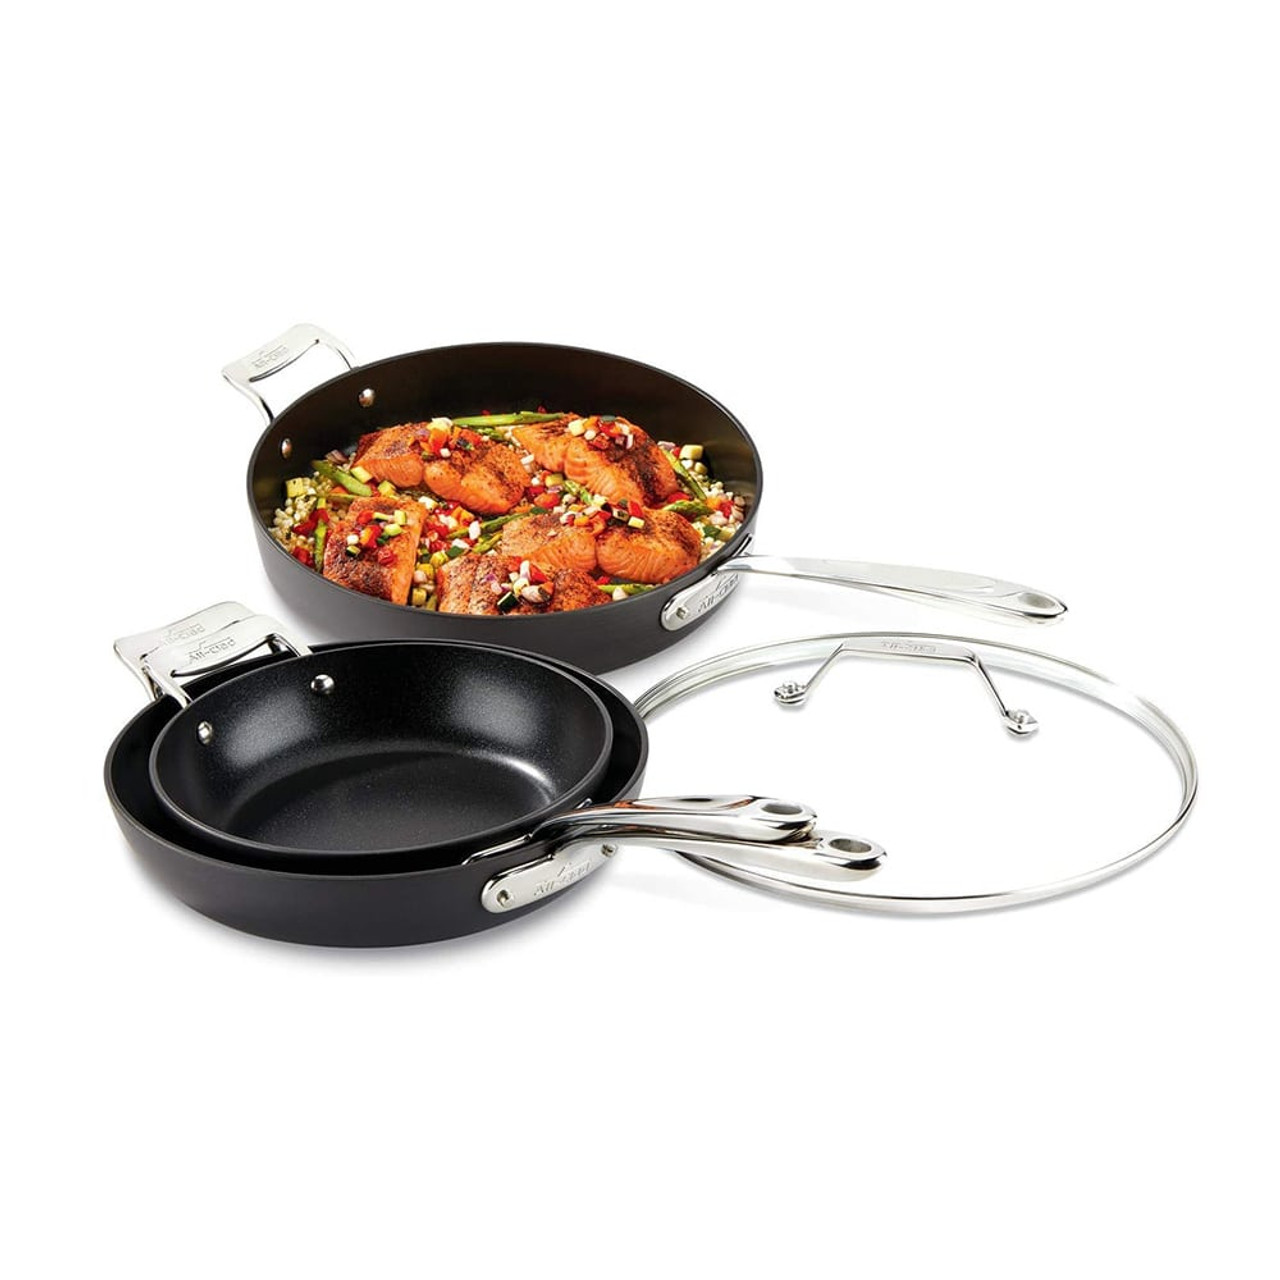 https://cdn11.bigcommerce.com/s-hccytny0od/images/stencil/1280x1280/products/3569/12741/all-clad-essentials-nonstick-4pc-skillet-set-1__43688.1601383132.jpg?c=2?imbypass=on